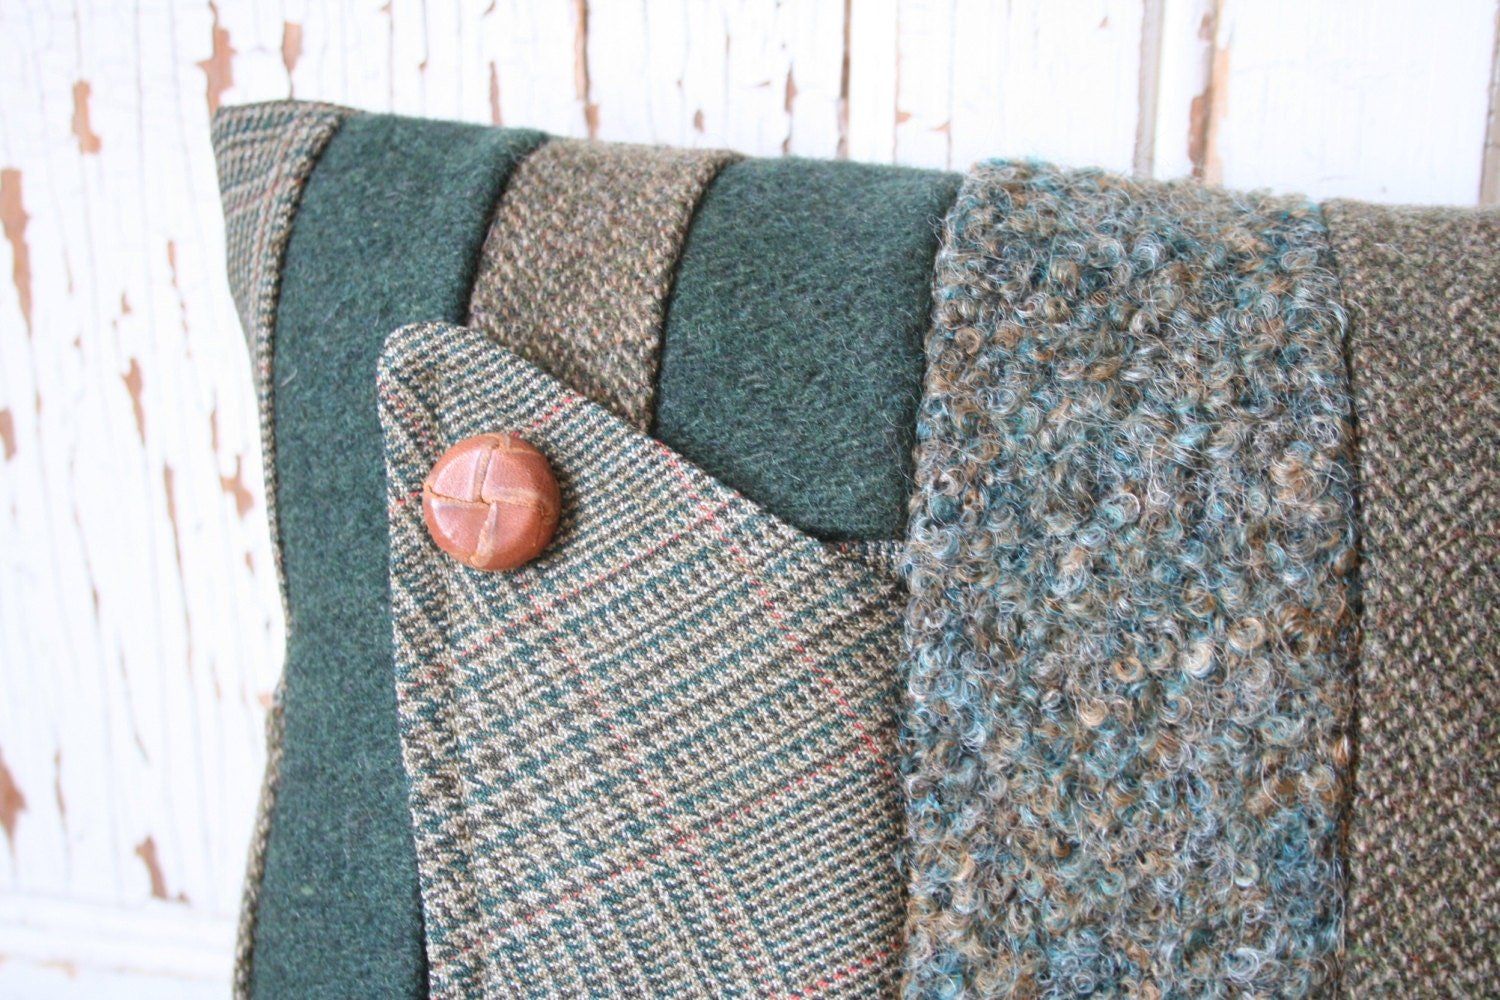 Green Wool Tweed Patchwork PILLOW COVER, Handemade, Recycled, Eco-Friendly Decor